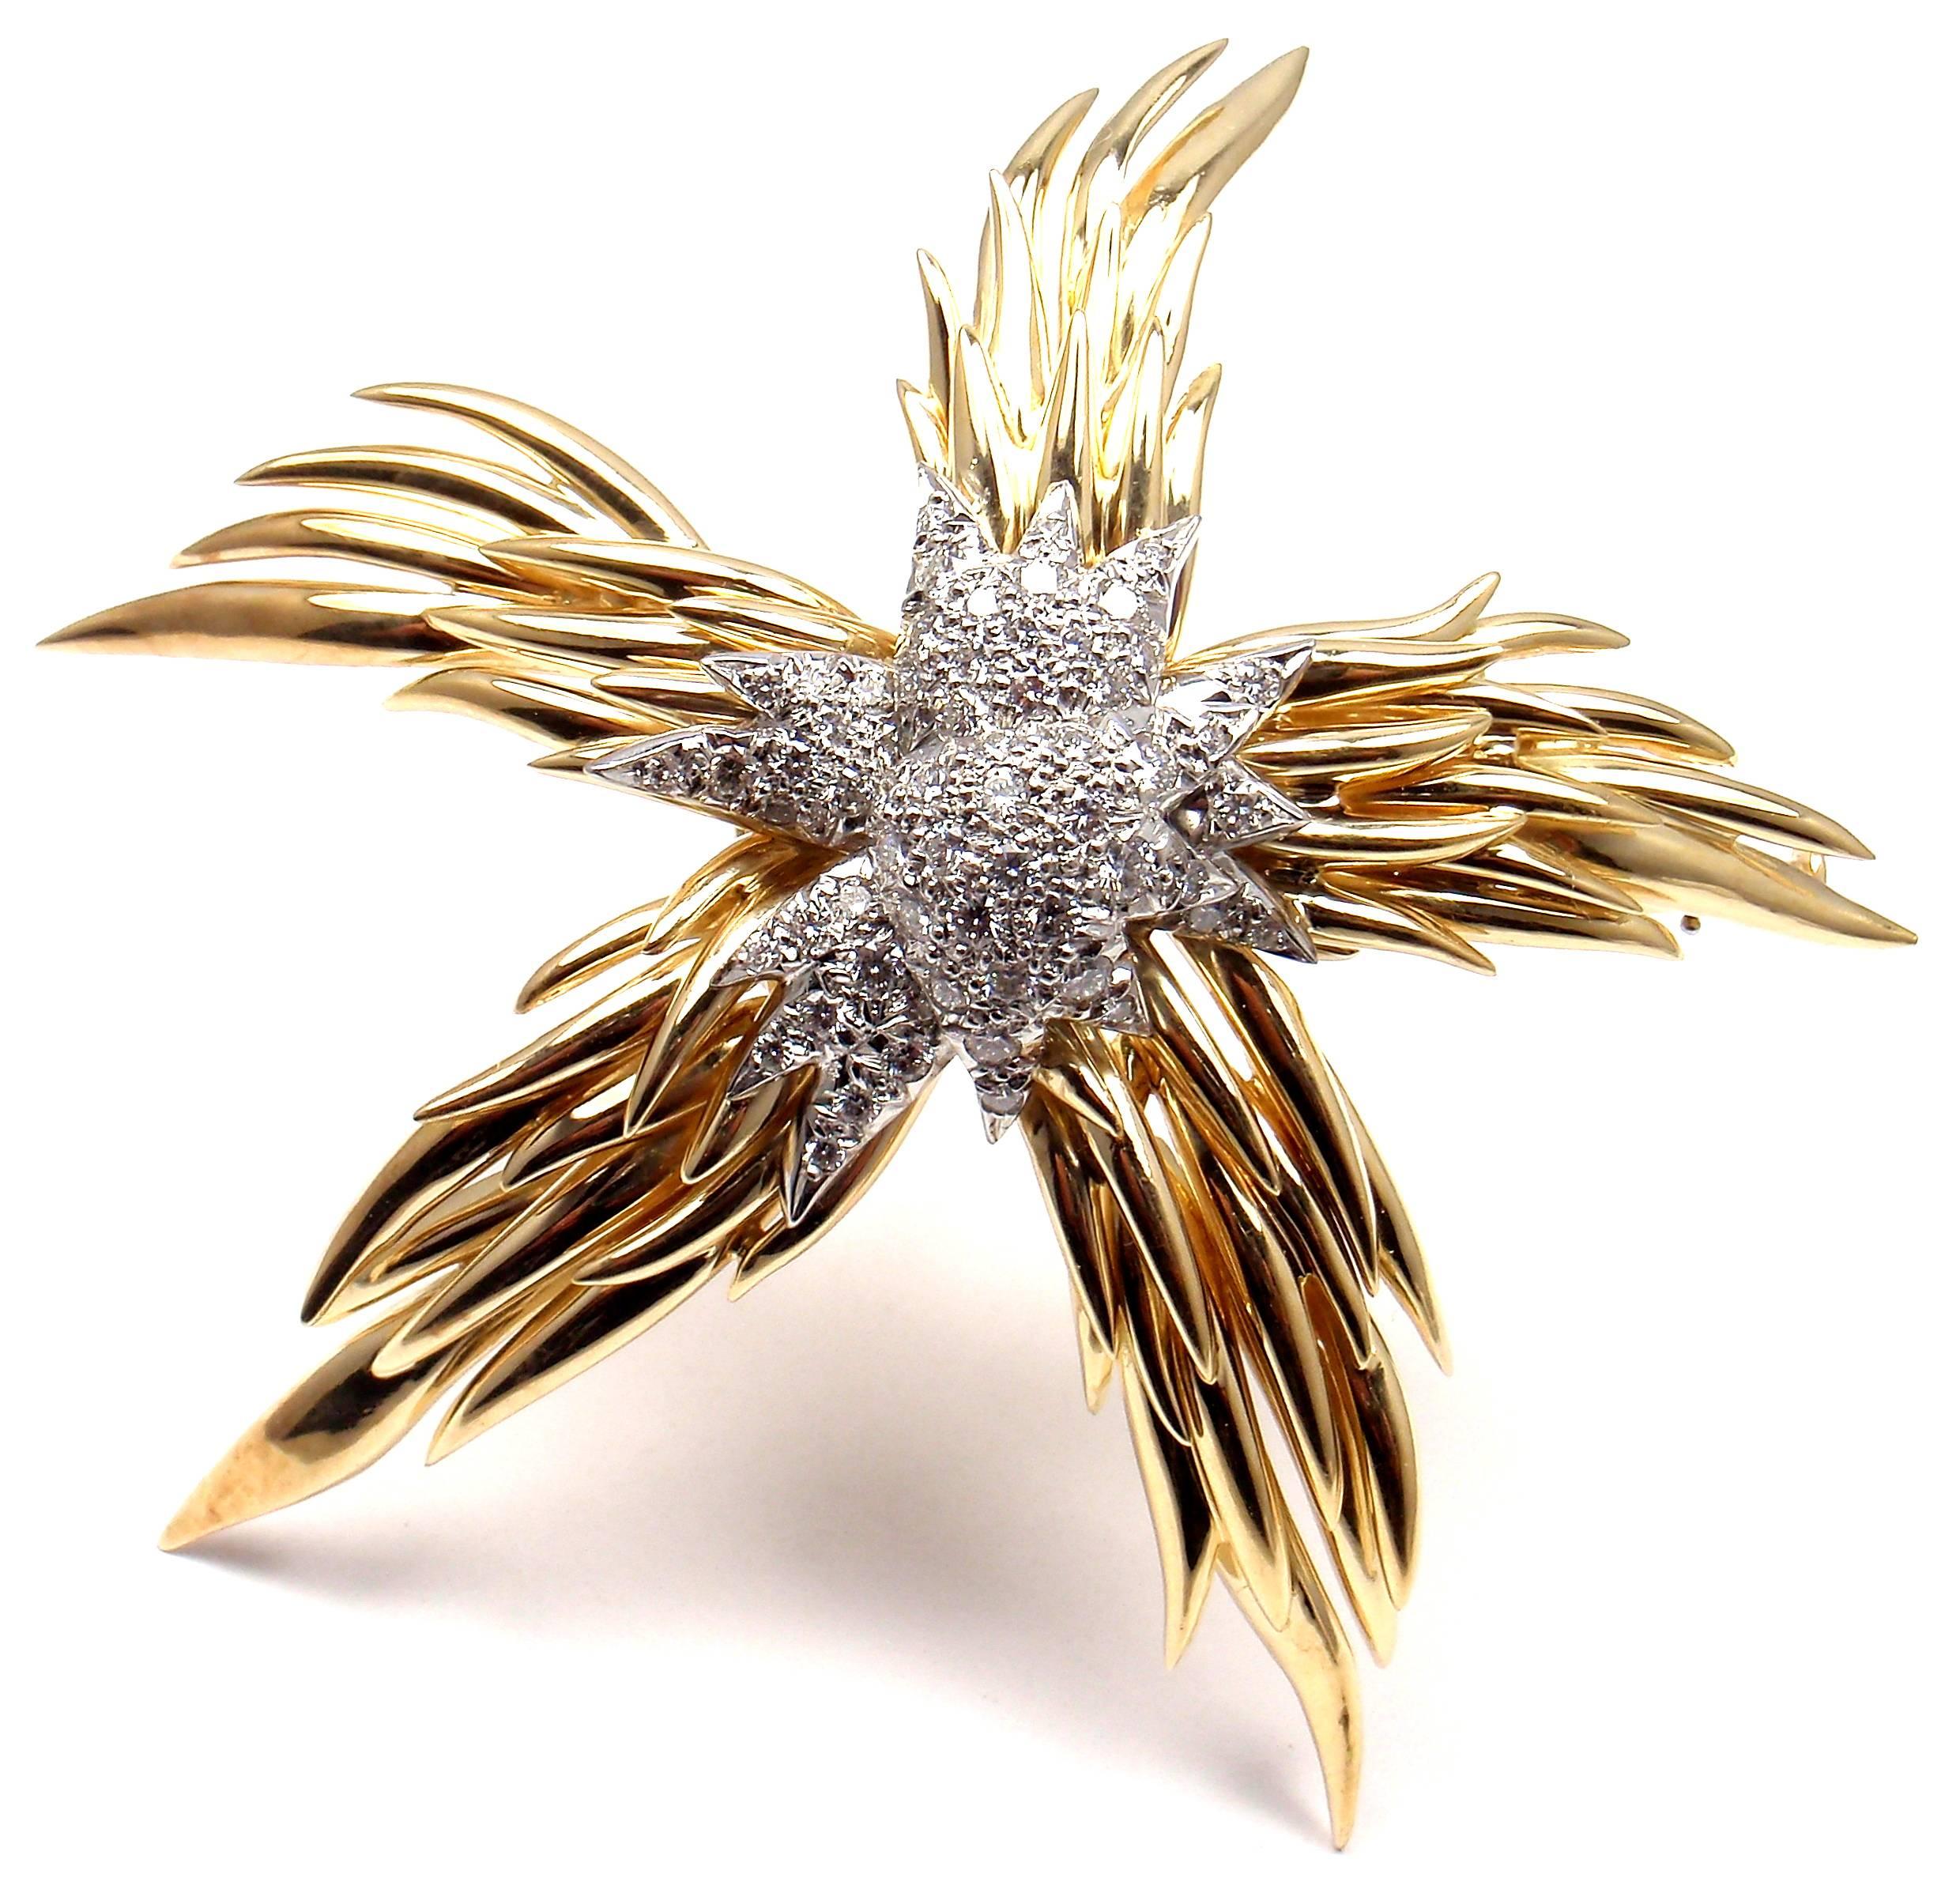 18k Yellow Gold and Platinum Diamond Paris Flame Pin Brooch by Jean Schlumberger for Tiffany & Co. 
This brooch comes with original Tiffany & Co box. 
With Round brilliant cut diamonds VVS1 clarity, E color 
total weight approx. 1.5ct 